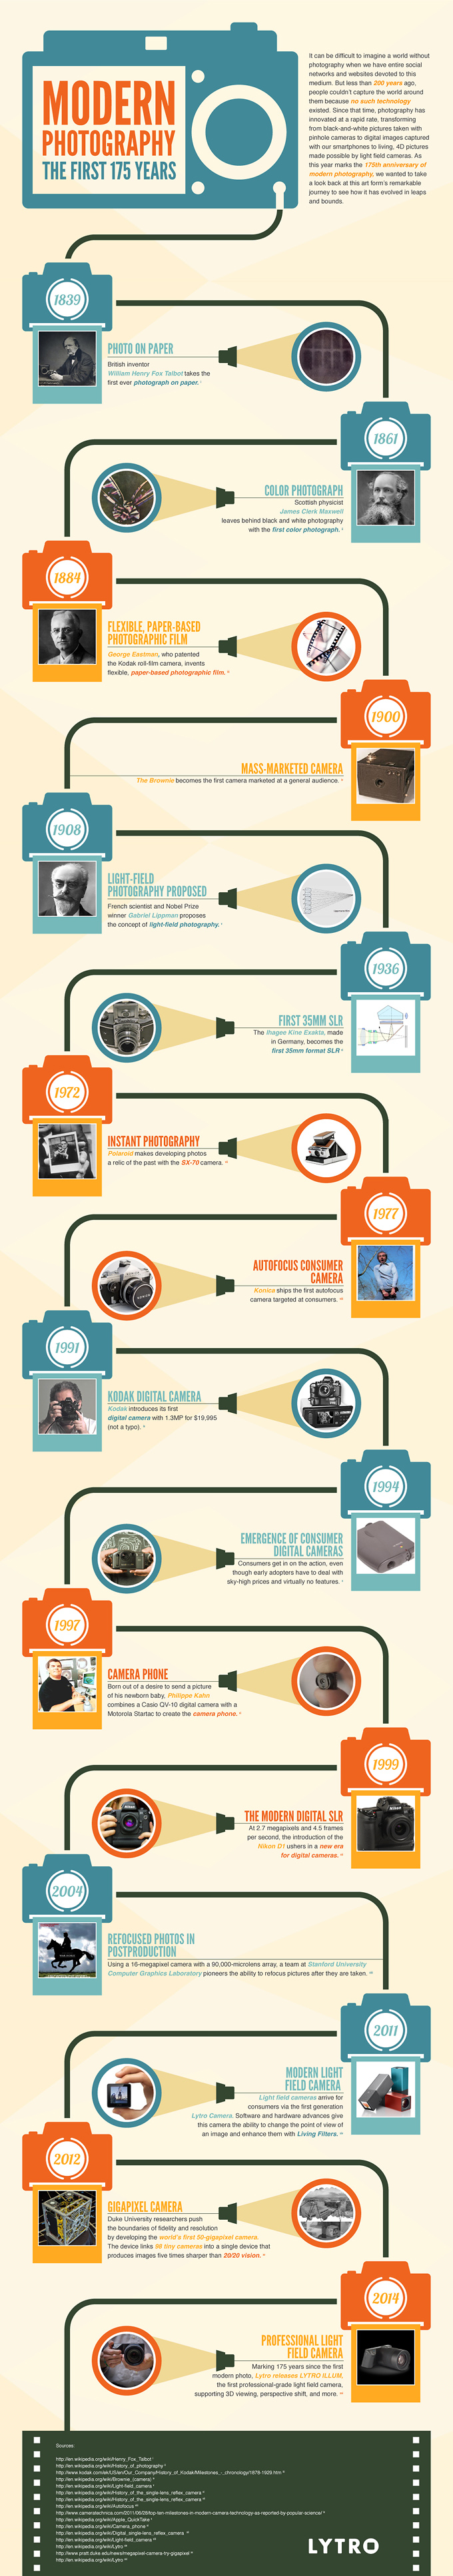 Infographic: Modern Photography - the first 175 years (picture: Lytro)